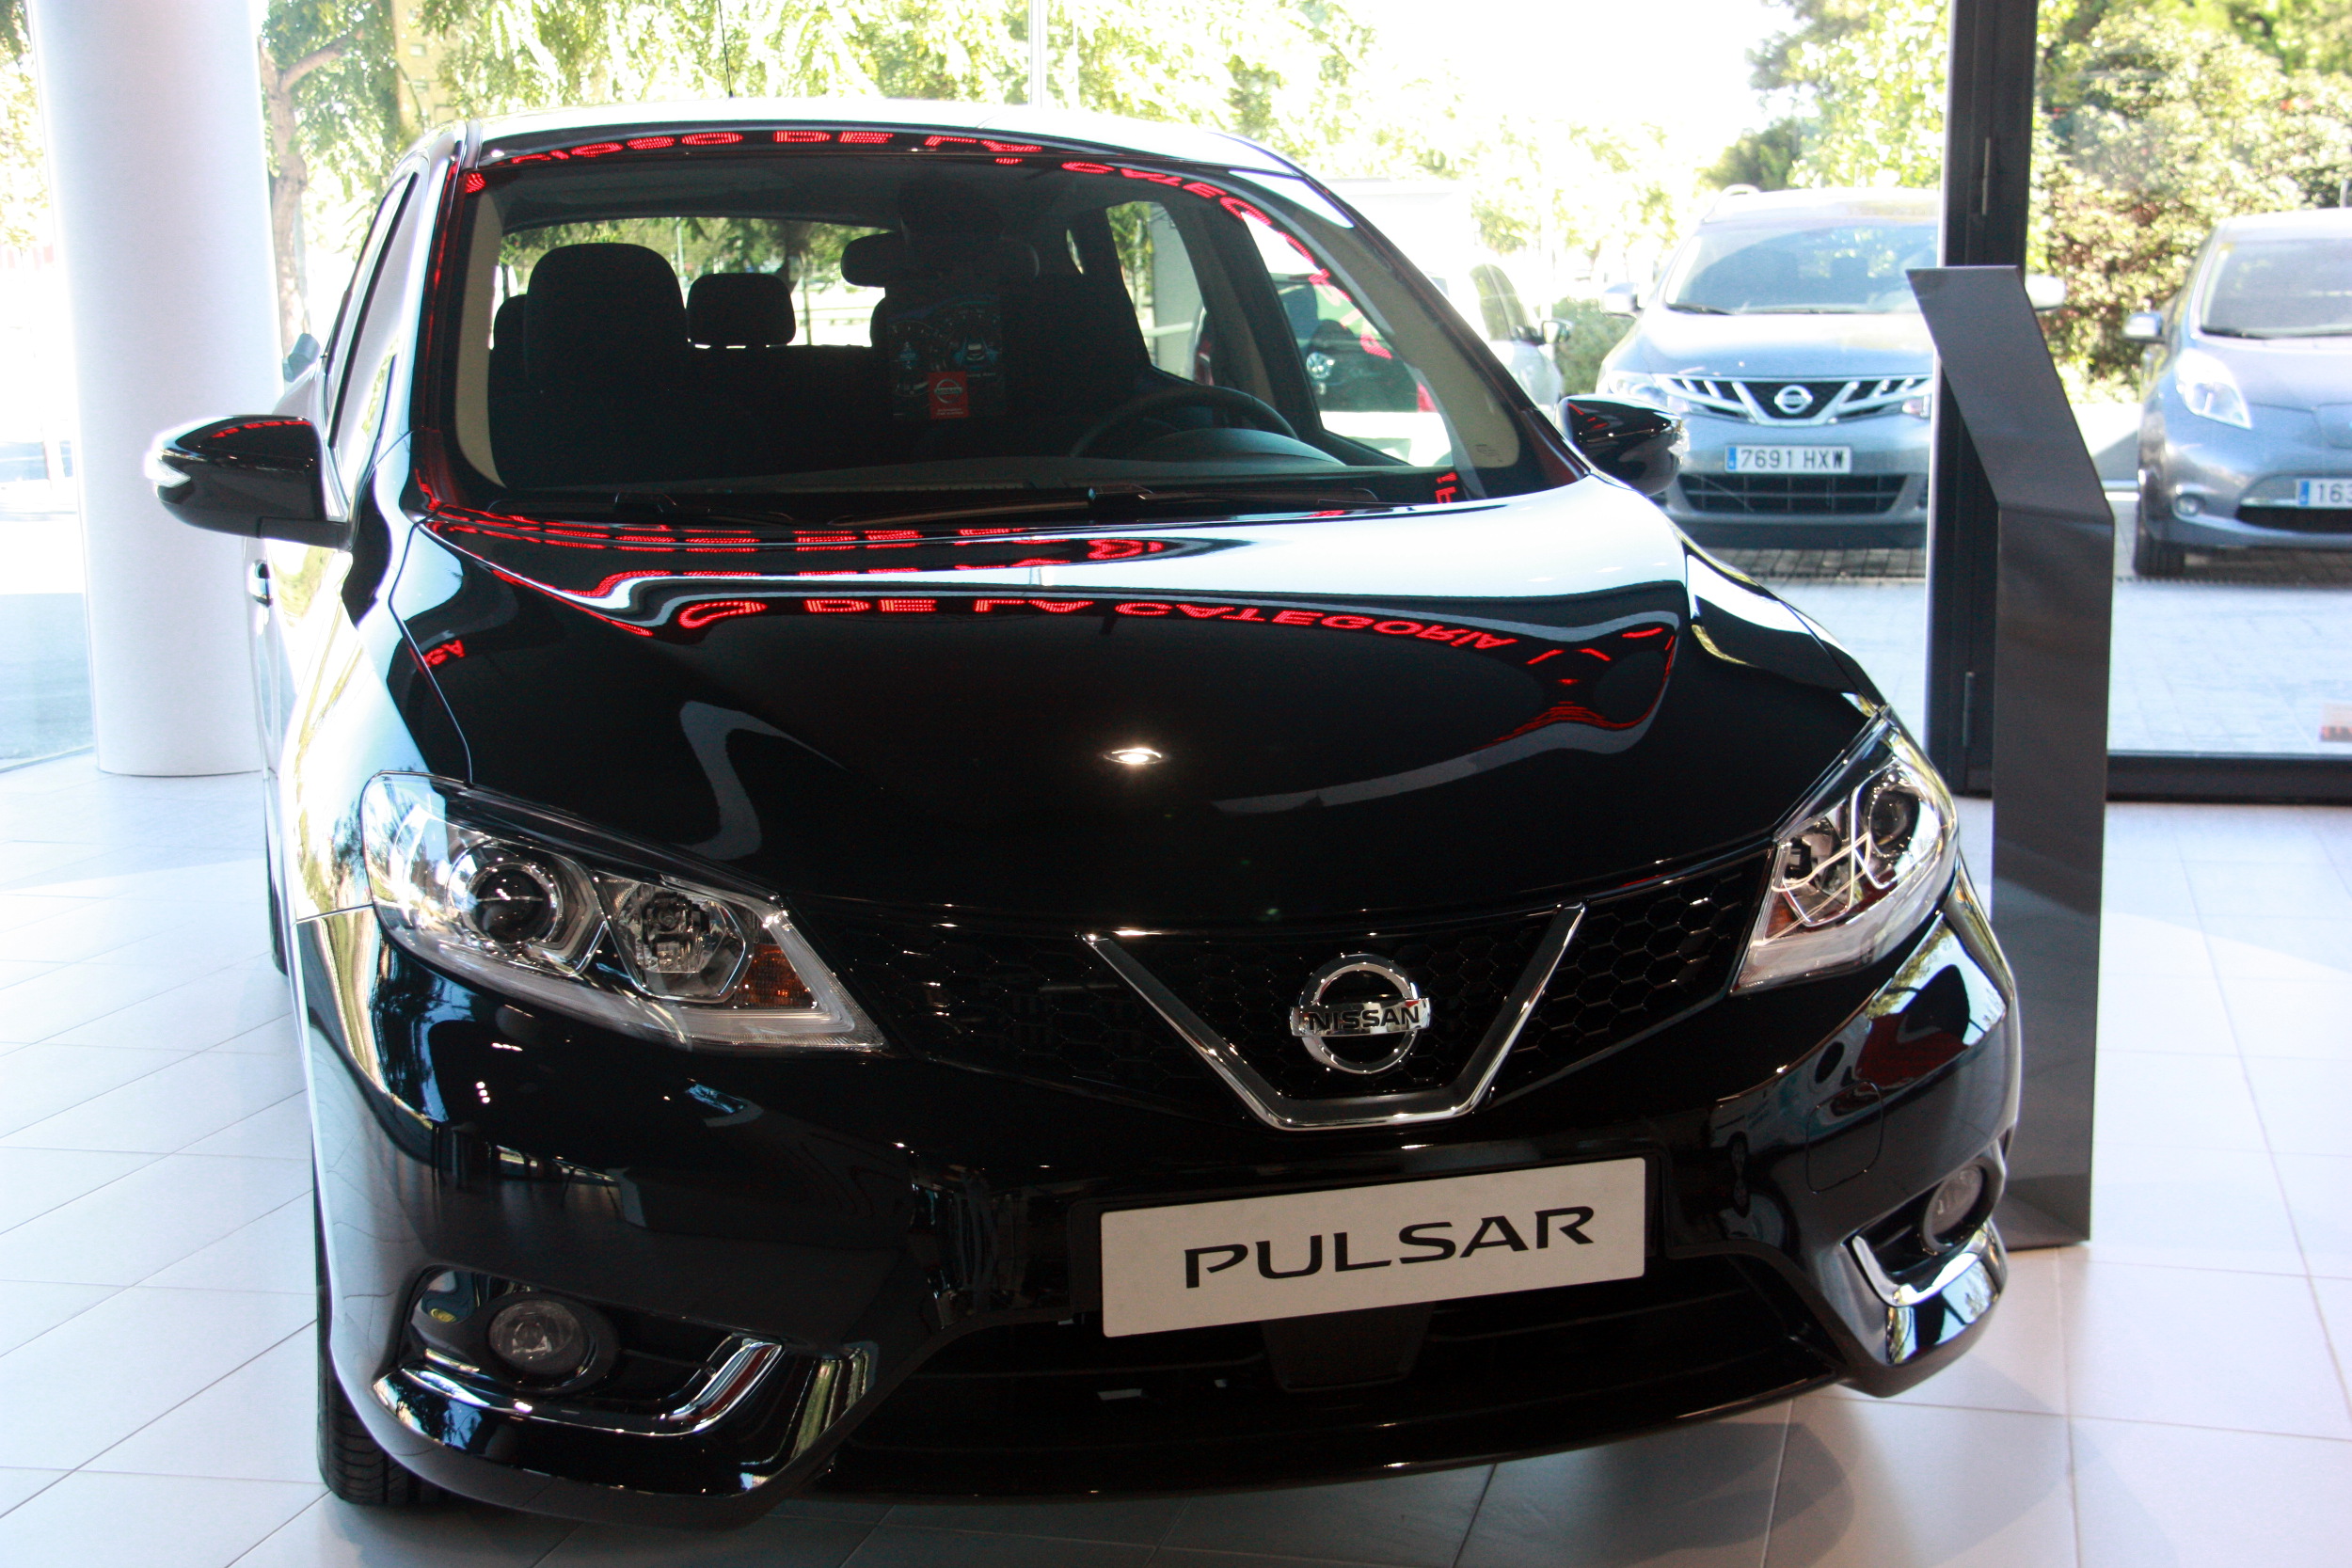 The new Pulsar model on display at the Nissan center on Octobver 23 2014 (by Sergi Sabaté)